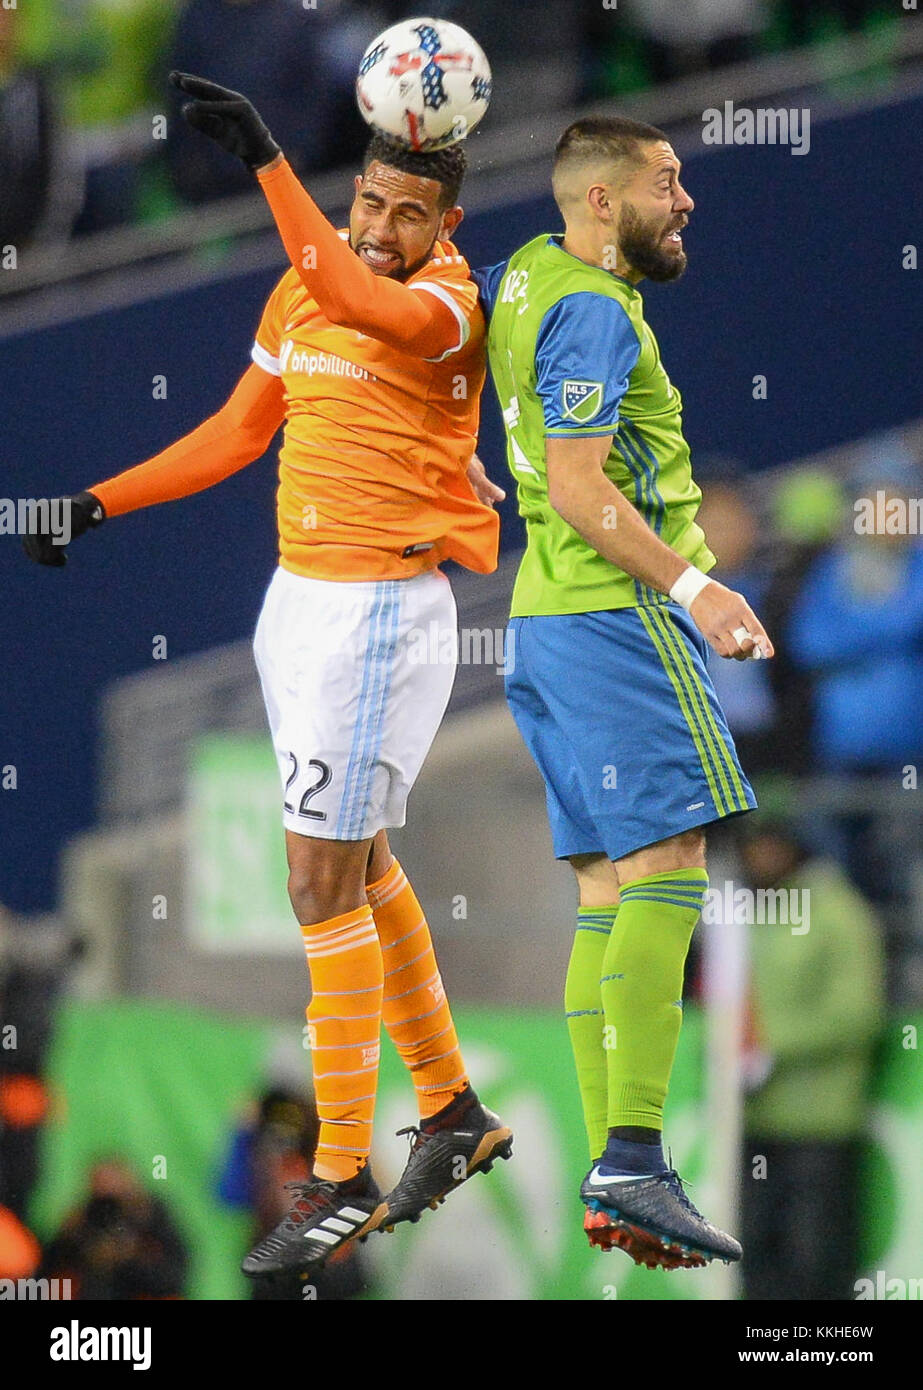 Seattle, Washington, USA. 30th Nov, 2017. Soccer 2017: CLINT DEMPSEY (2) and LEONARDO (22) battle for a header as the Houston Dynamo play the Seattle Sounders in the 2nd leg of the MLS Western Conference Finals match at Century Link Field in Seattle, WA. Credit: Jeff Halstead/ZUMA Wire/Alamy Live News Stock Photo